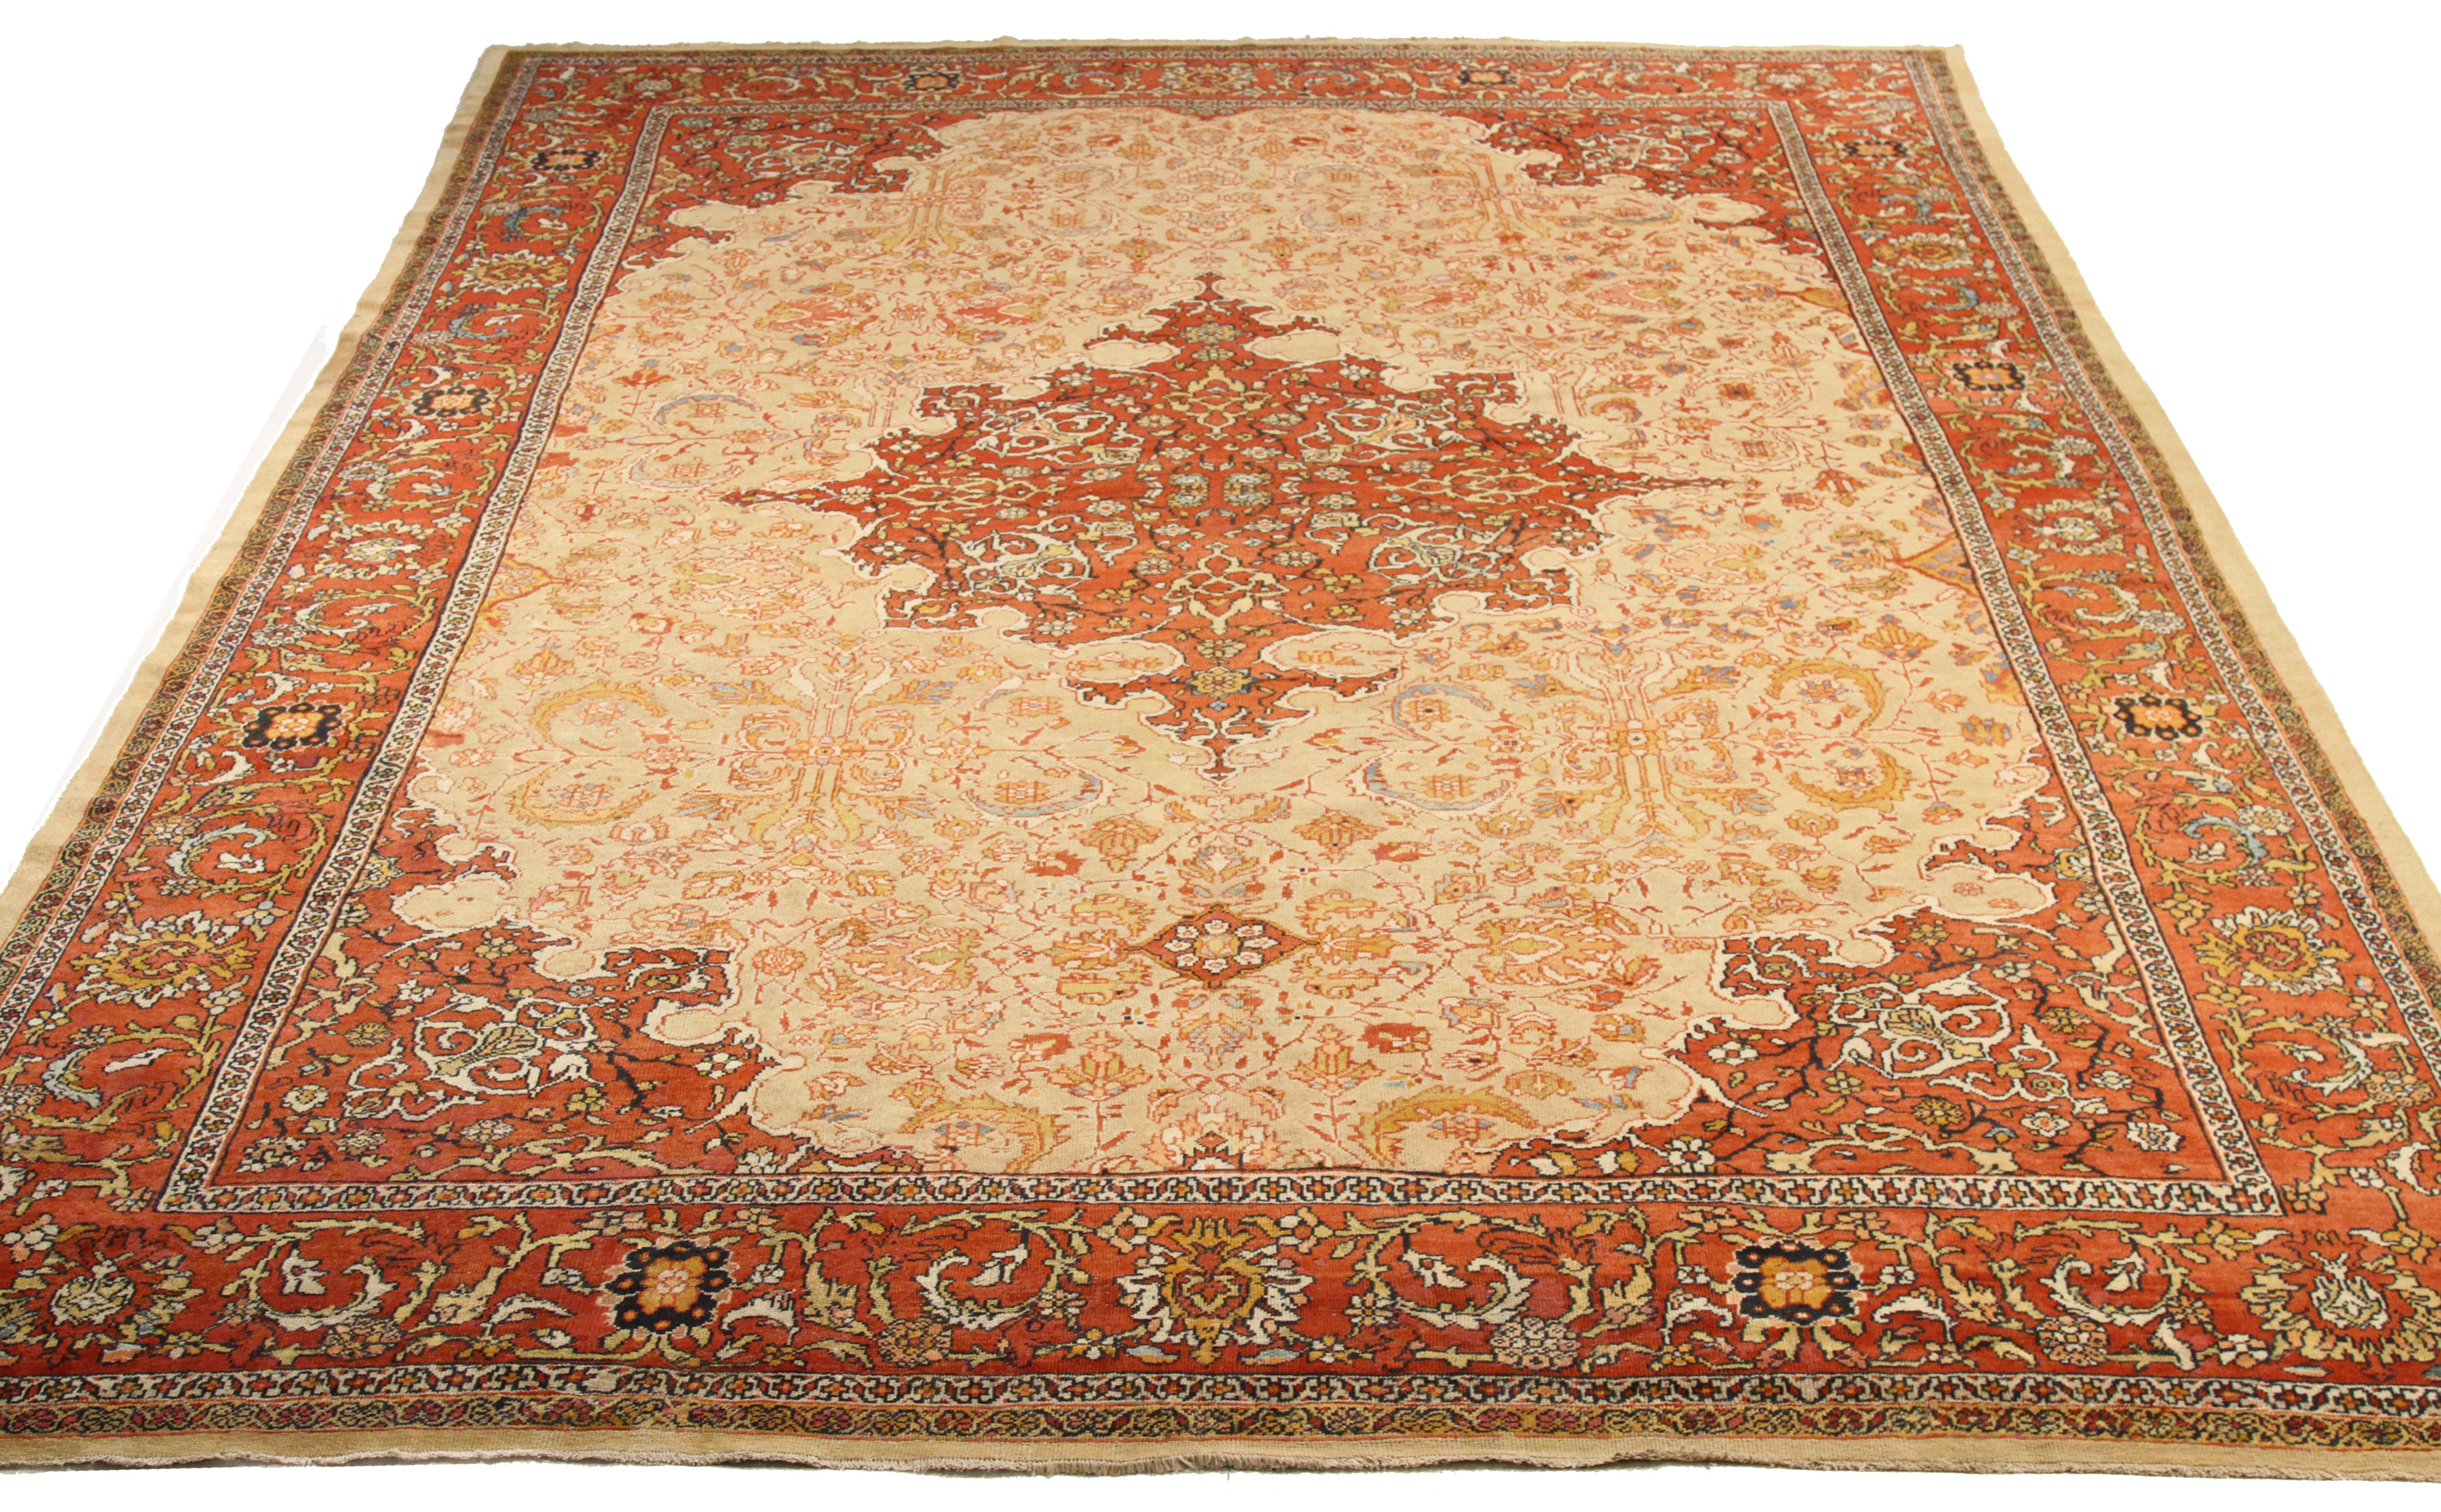 Modern 21st century hand-woven Persian area rug made from fine wool and all-natural vegetable dyes that are safe for people and pets. This beautiful piece features a rich field of floral details in various colors which is the traditional weaving